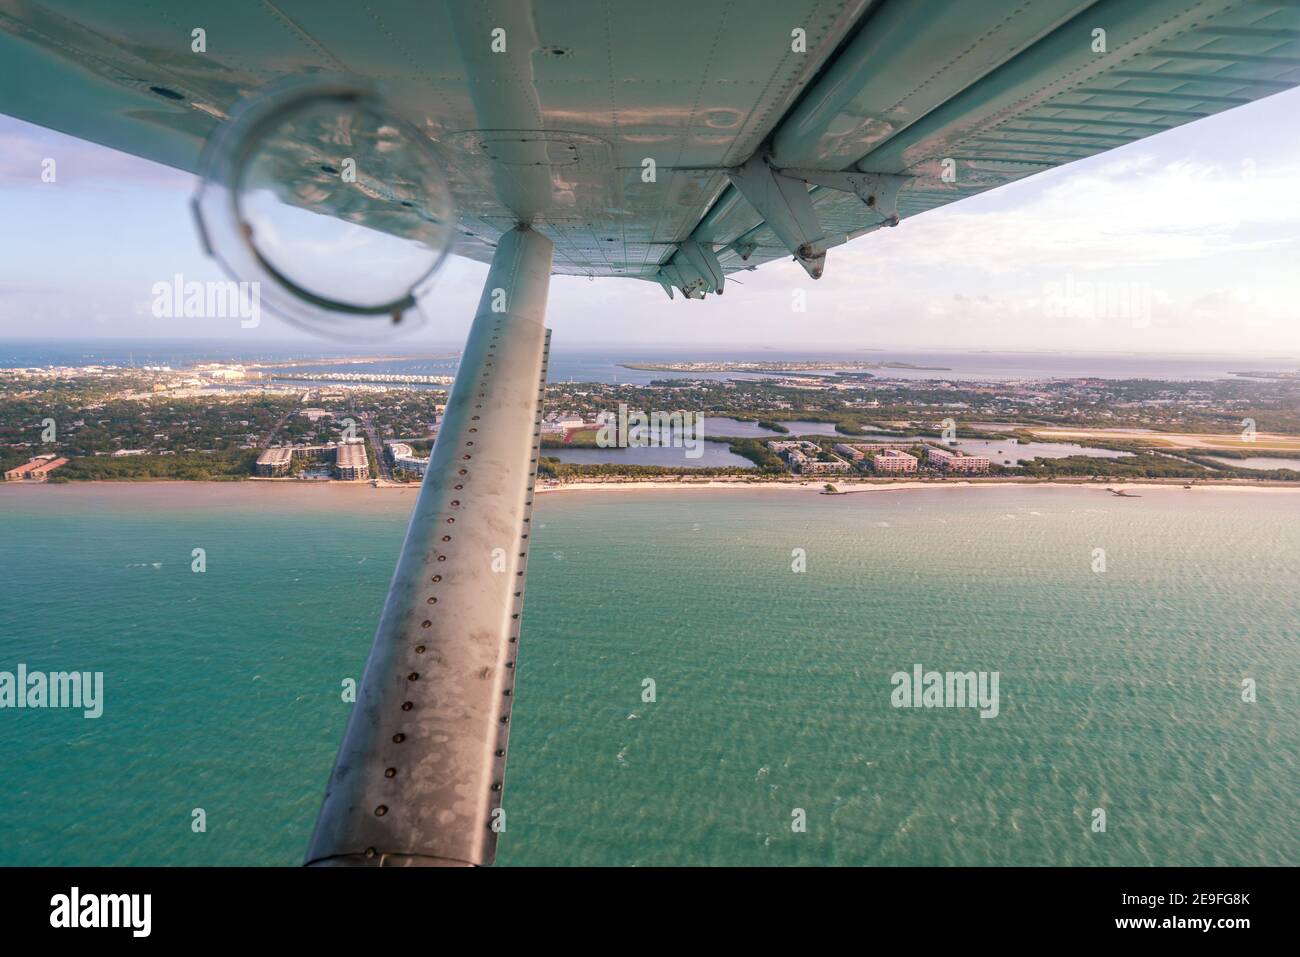 Aerial view from the window of a small hydroplane flying over Key West, Dry Tortugas, Florida. Wing and strut in the view. Stock Photo